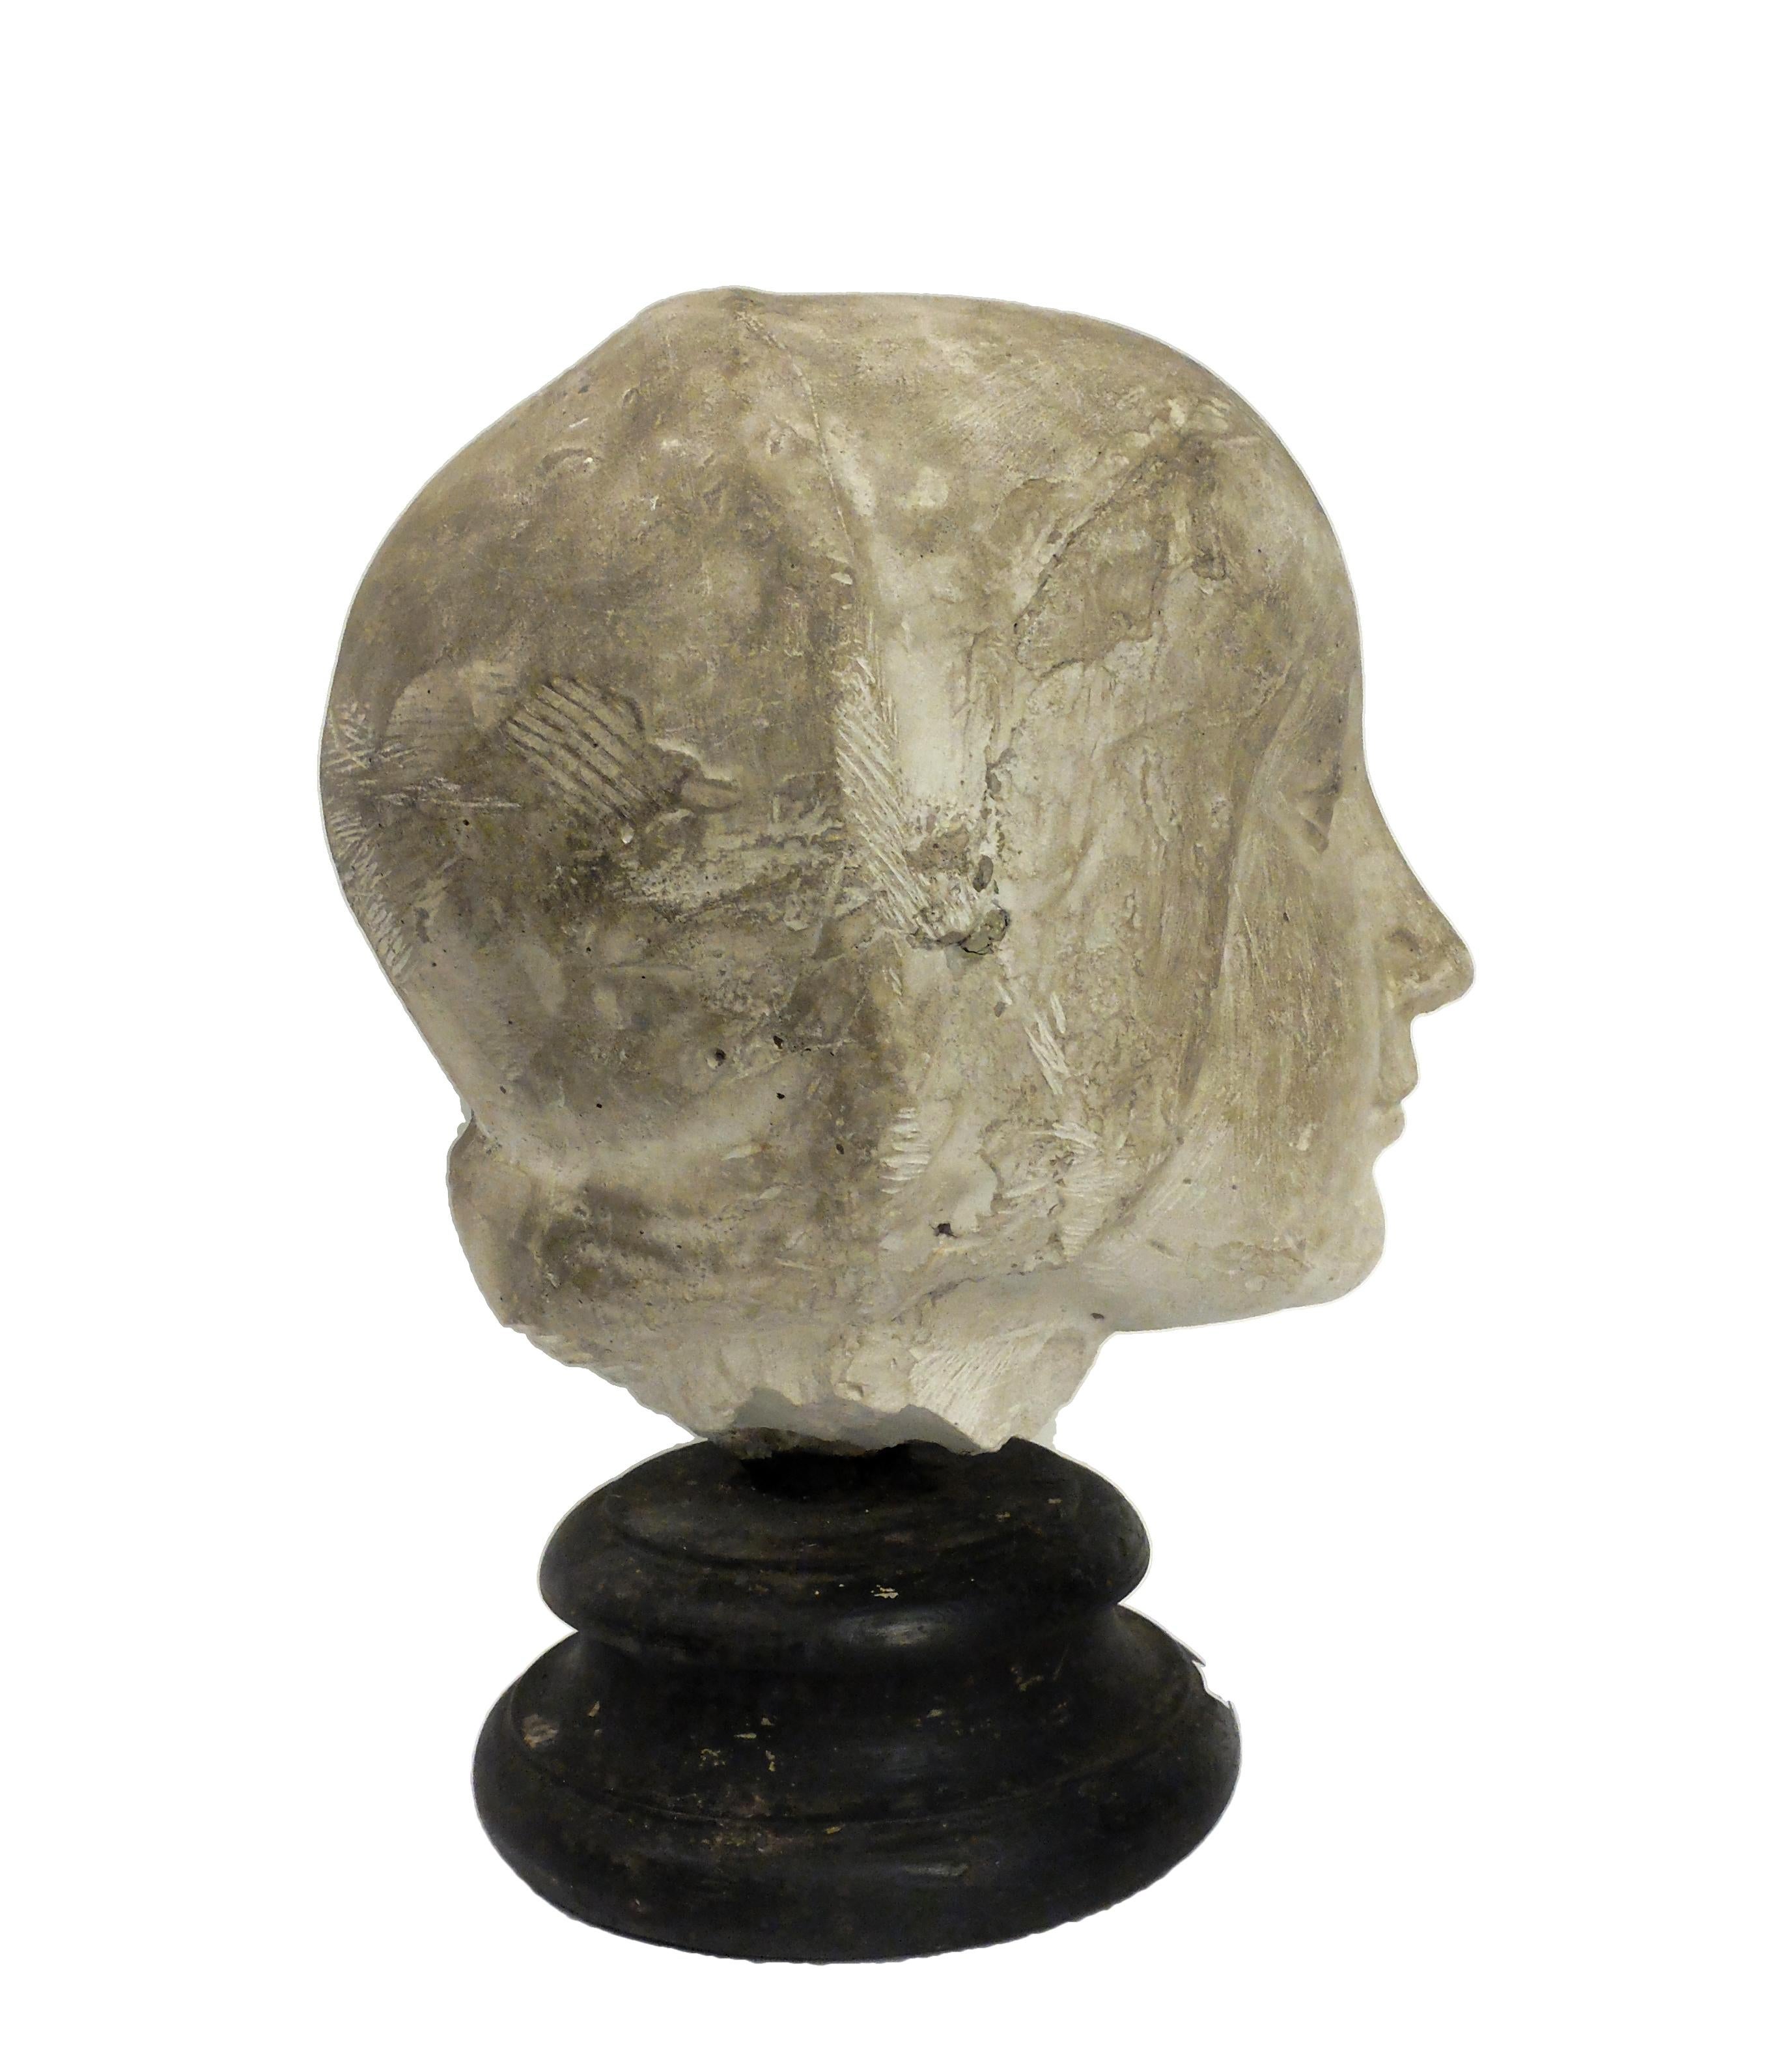 Over the wooden black painted base is set the cast of Eleonora D’Aragona head Cast for drawing teaching of student in Academy. Made out of plaster with wheel turned fruitwood ebonized base, circa 1890.